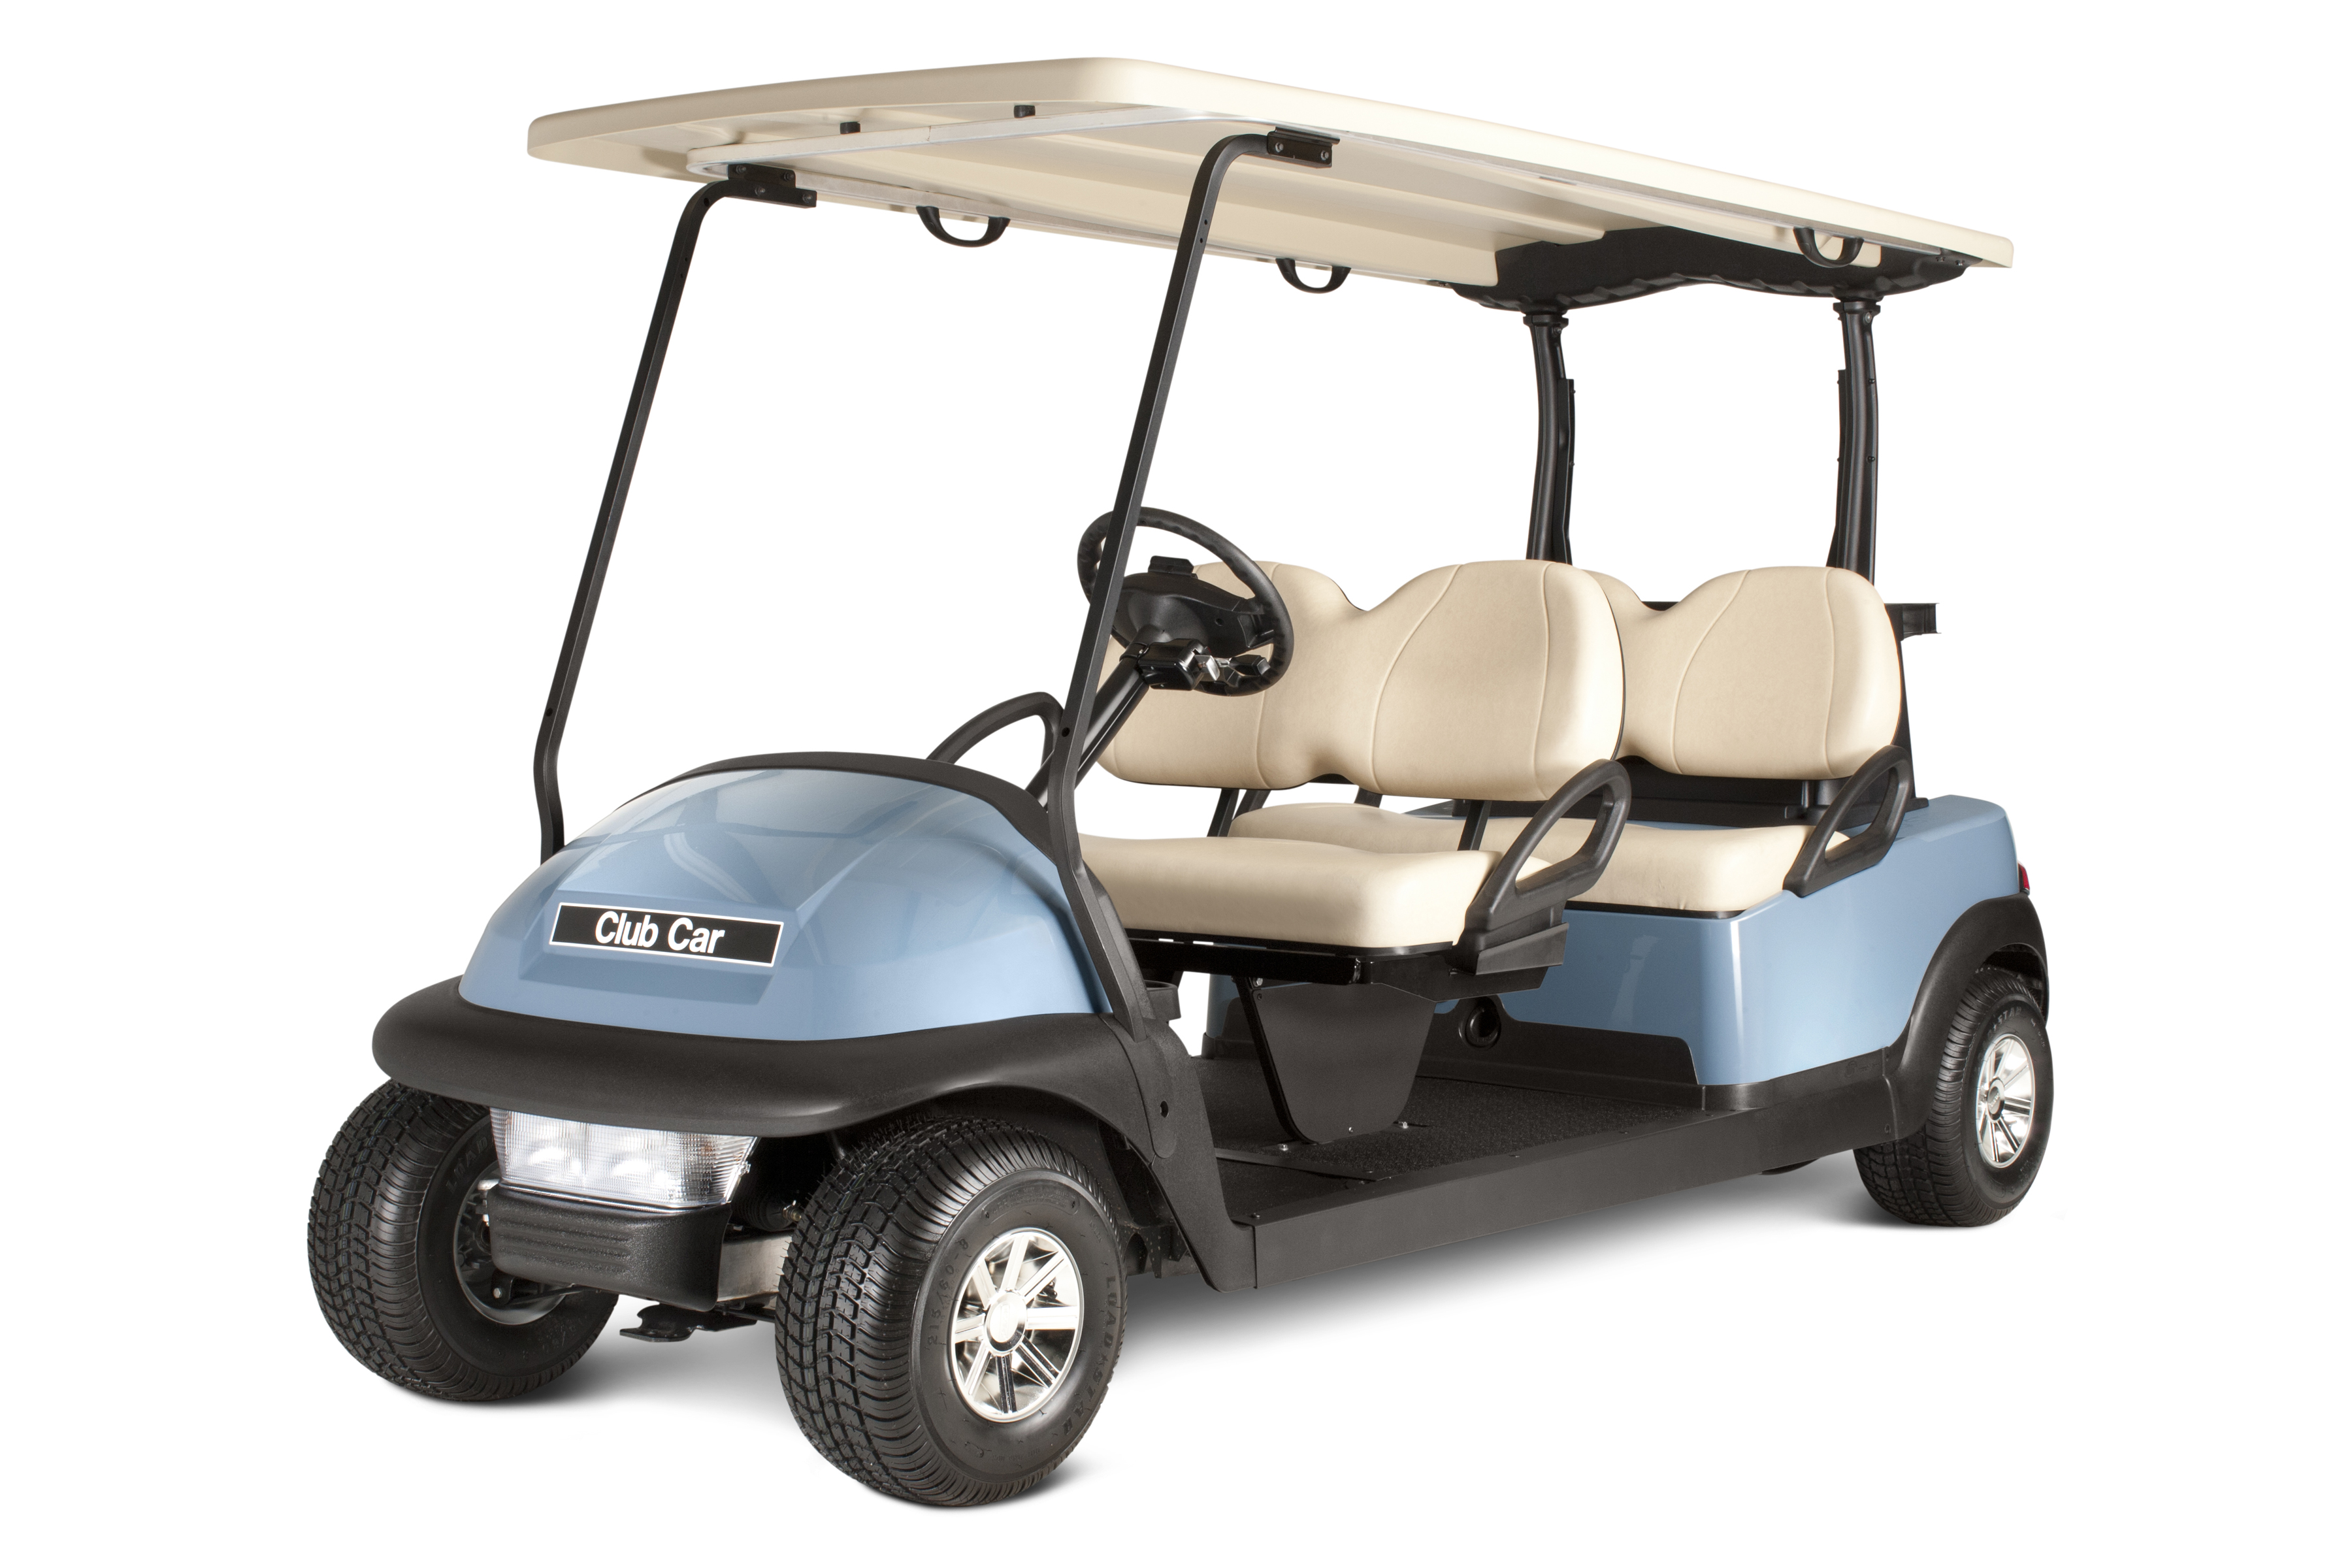 Four-passenger Precedent golf cars are also available for campground rentals.